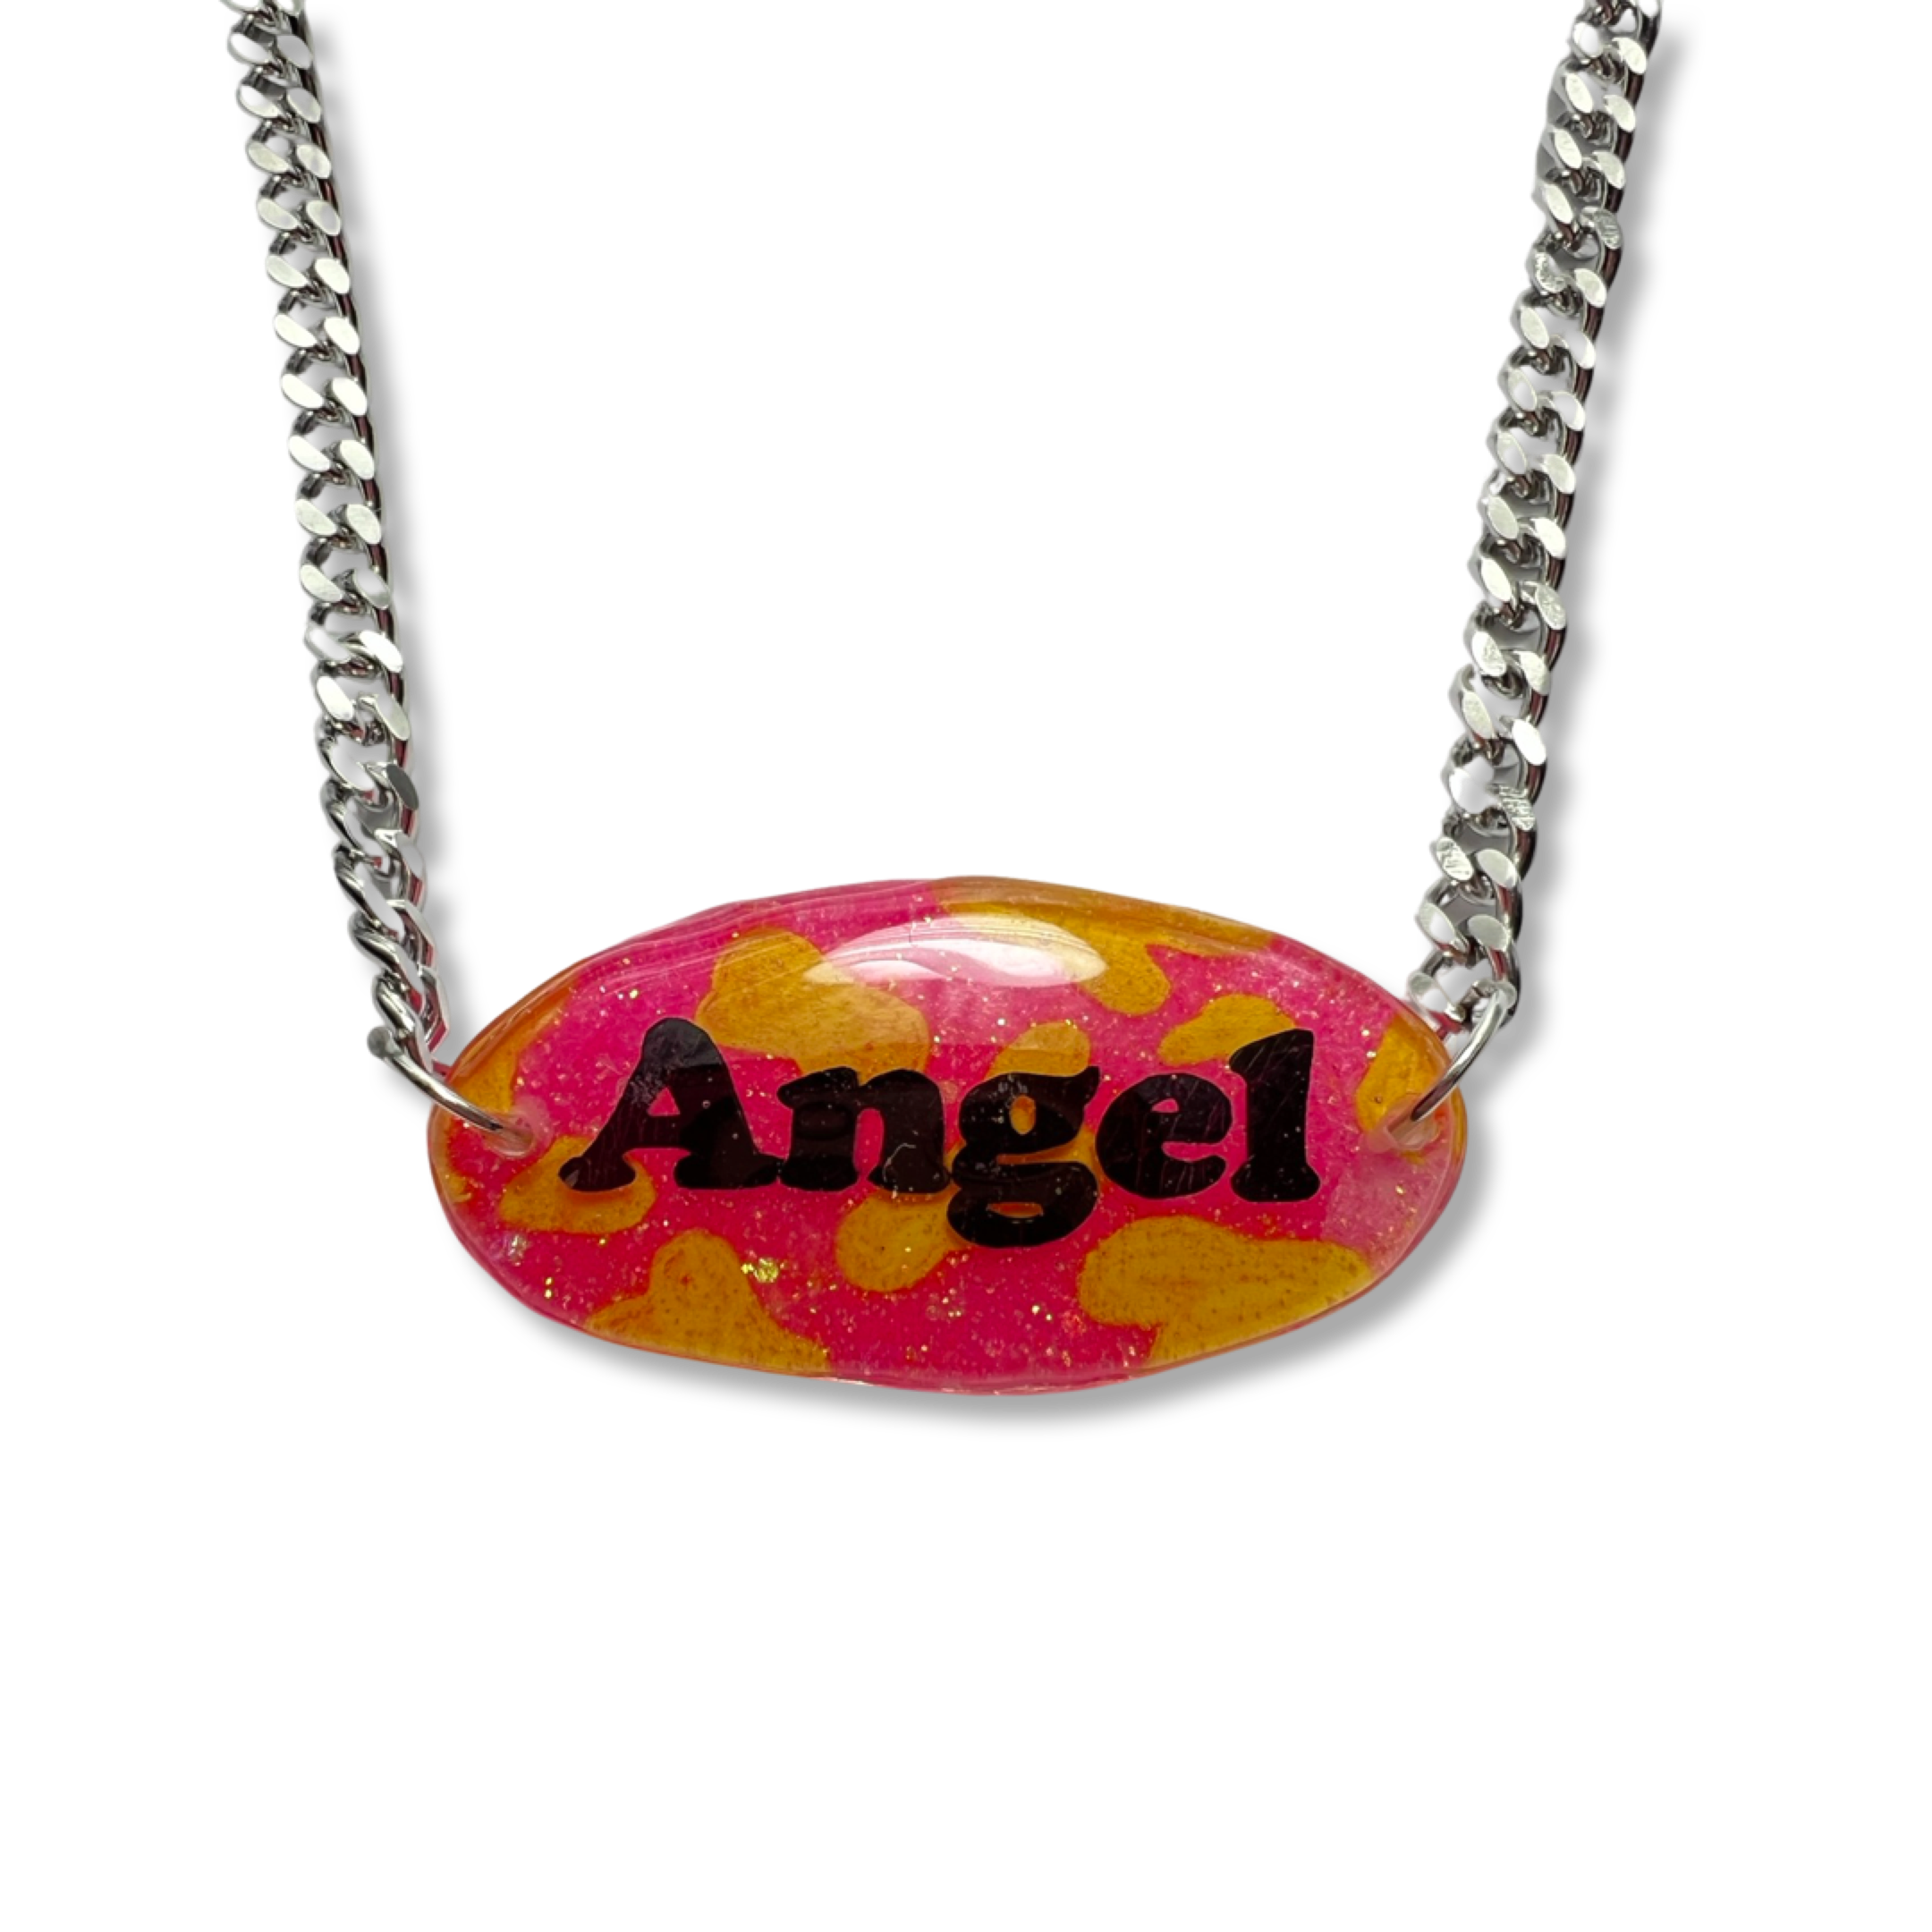 ANGEL JELLY NECKLACE